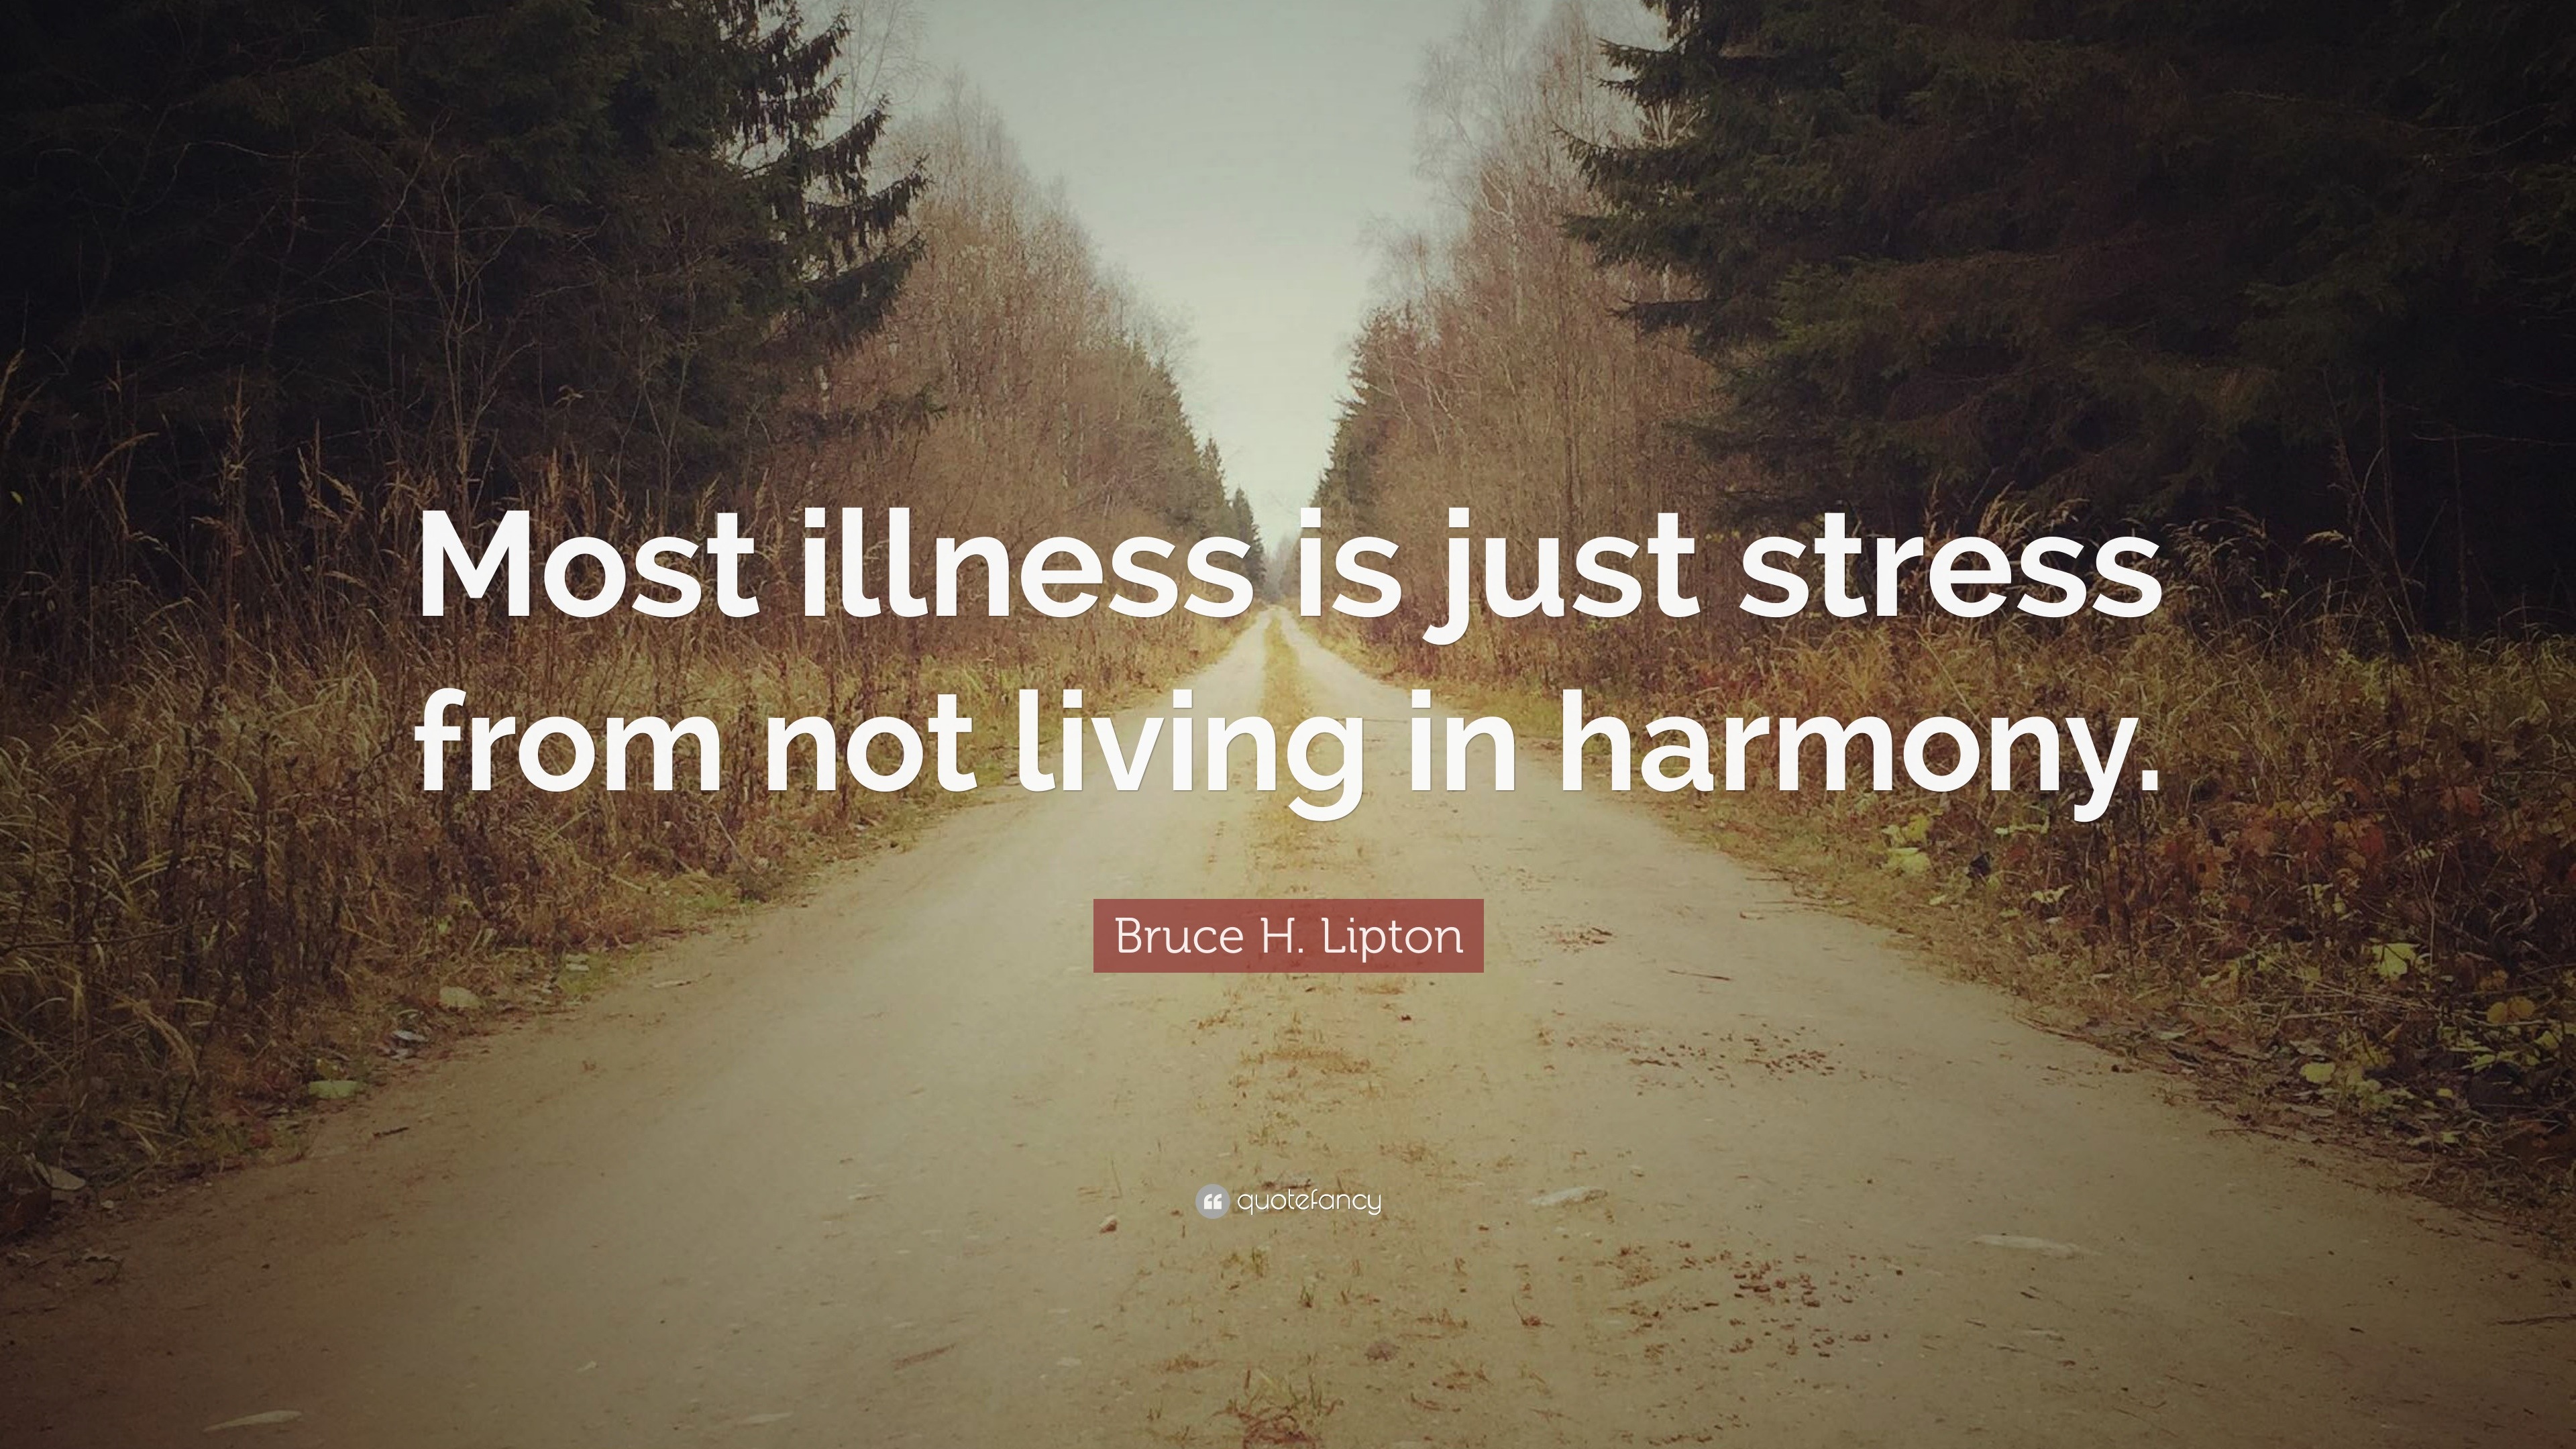 Bruce H. Lipton Quote: "Most illness is just stress from not living in harmony." (7 wallpapers ...